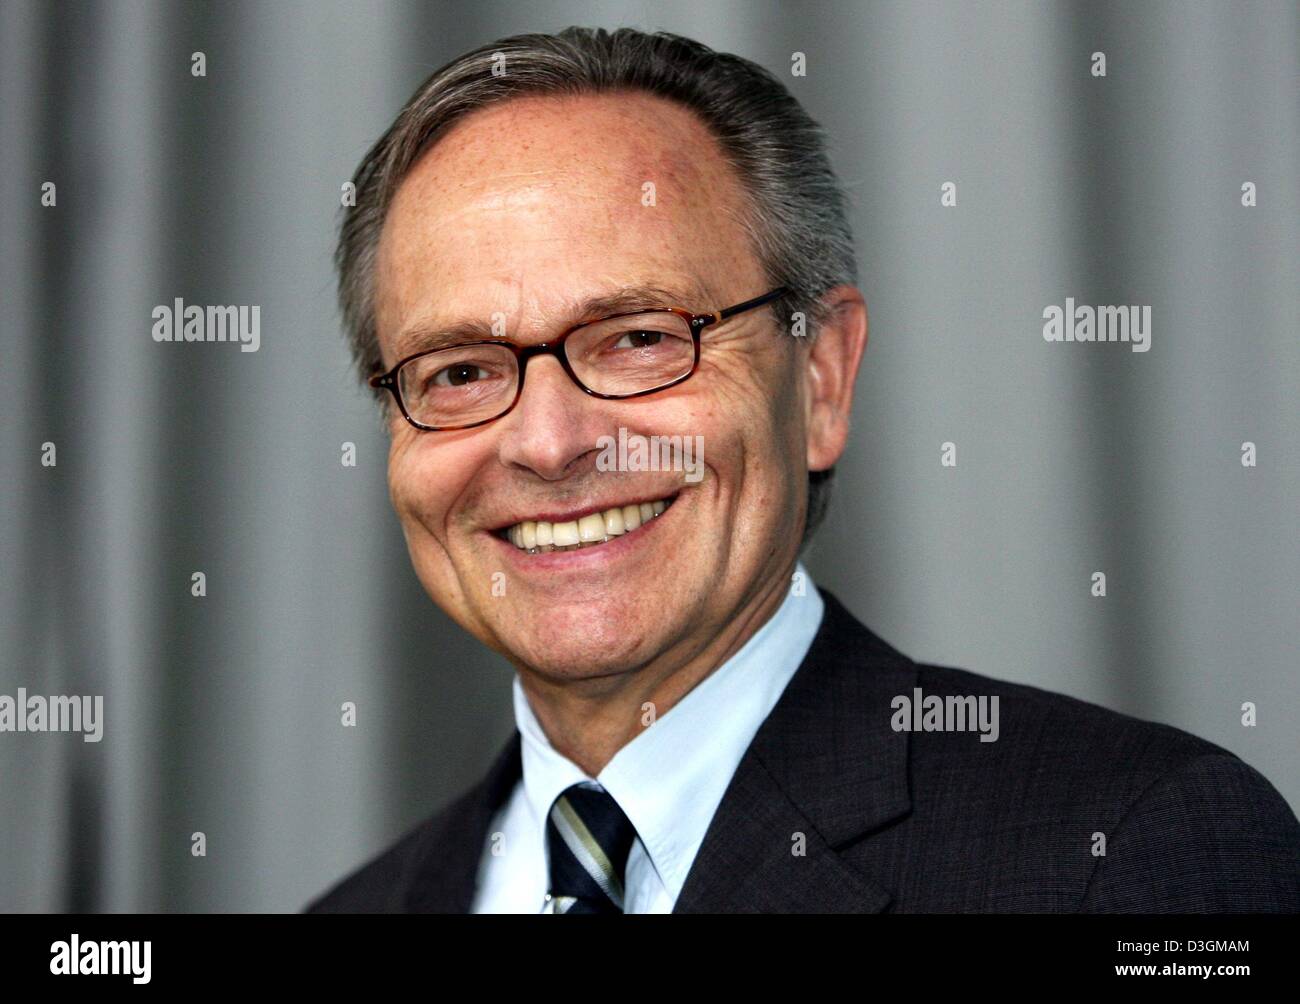 (dpa) - Guenther Fielmann, chairman of Fielmann AG, smiles during the company's general meeting in Hamburg, Germany, 8 July 2004. Stock Photo